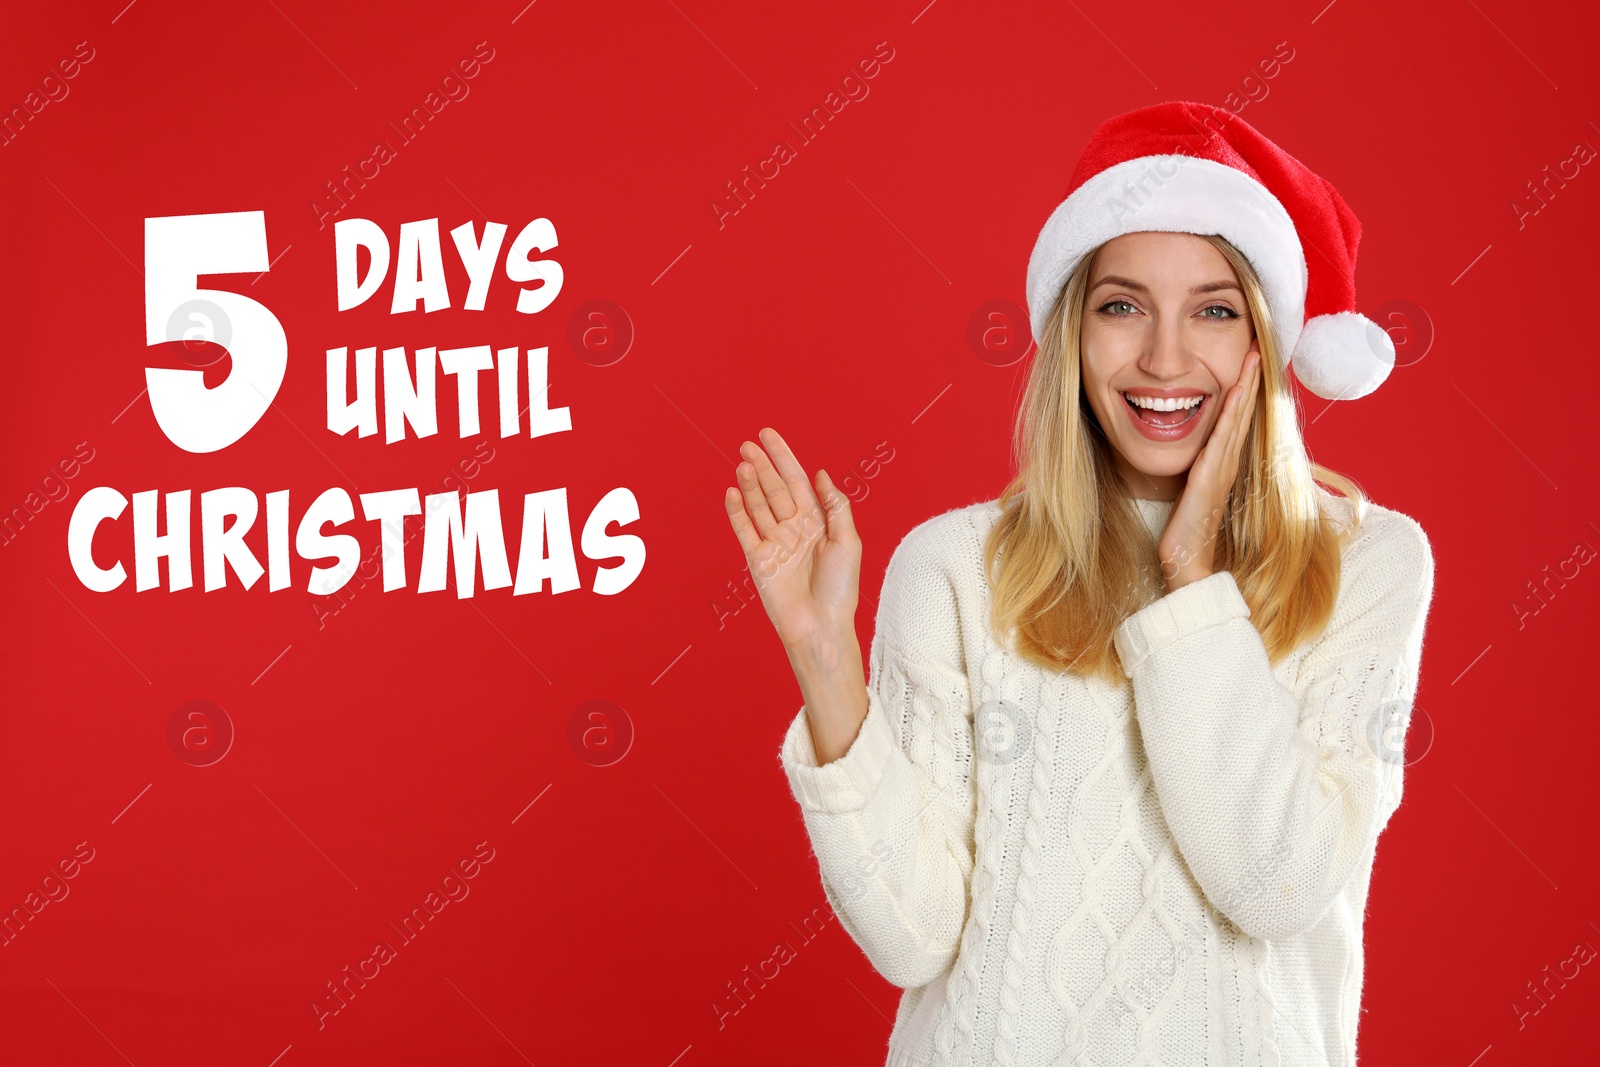 Image of Christmas countdown. Excited woman wearing Santa hat on red background near text